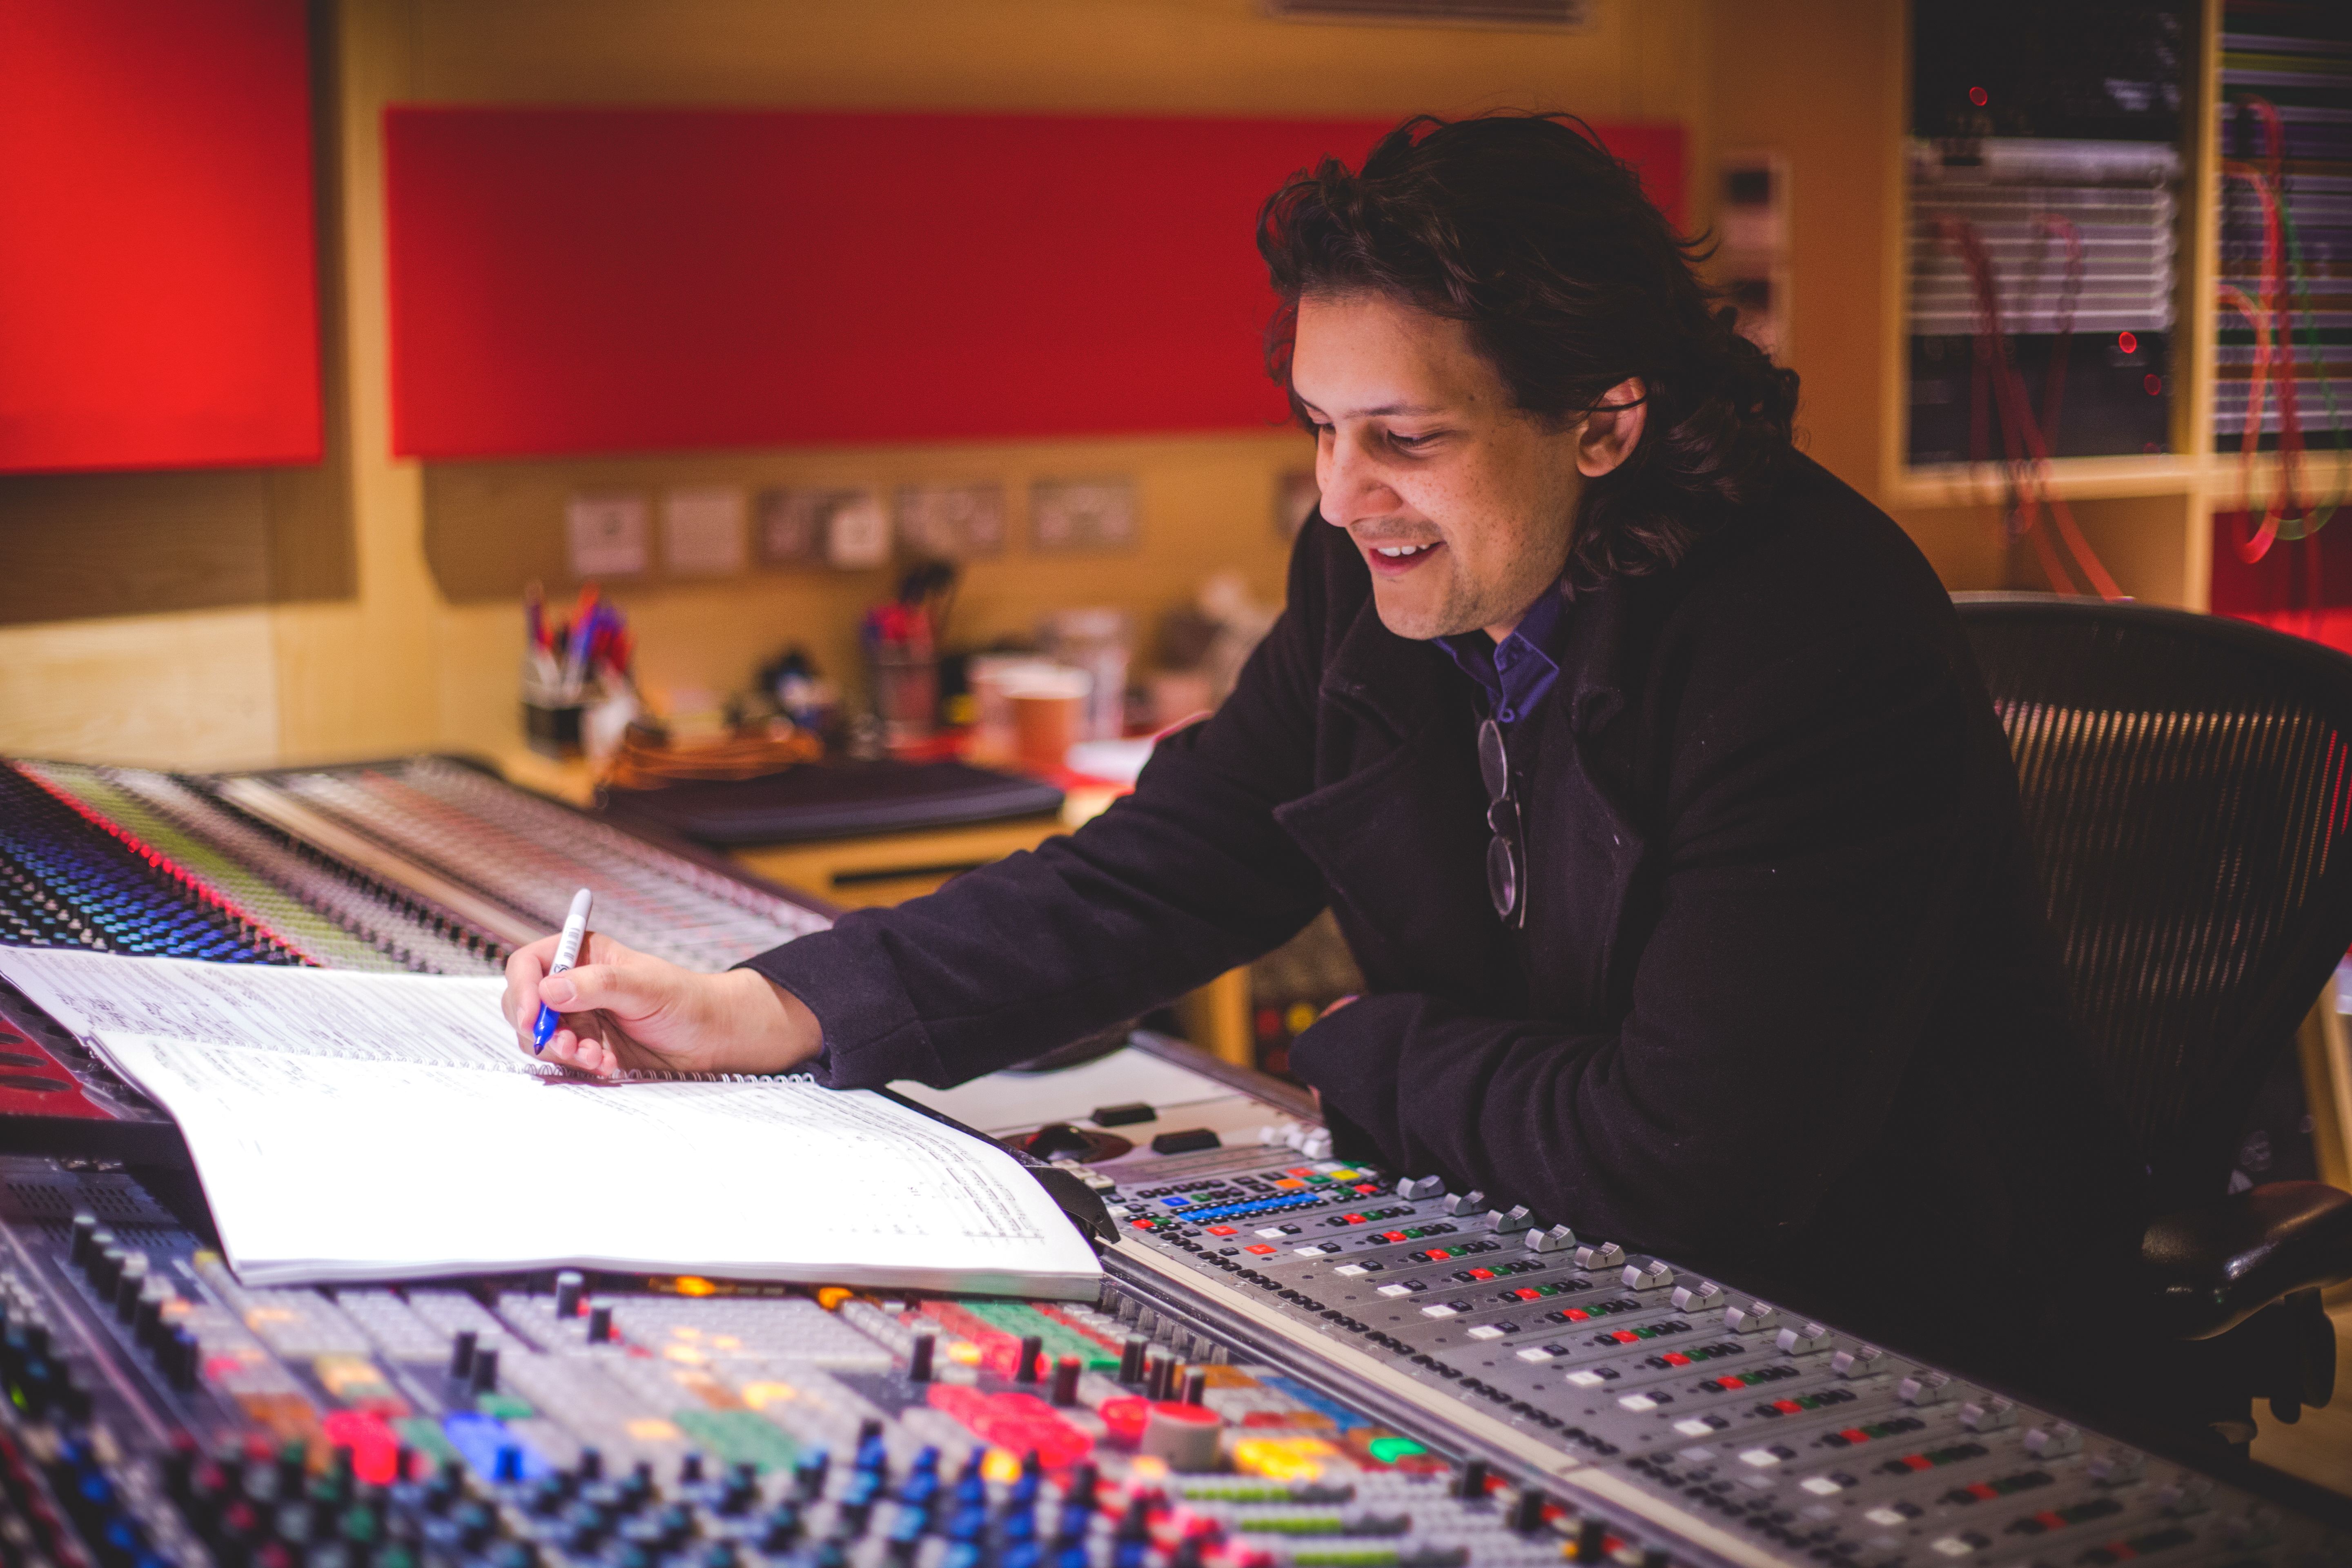 Jehan Stefan (orchestrator) at Abbey Road Studios (London) for the WHEN MUSIC SOUNDS recording sessions composed and orchestrated by Rebecca Dale. Orchestra conducted by Jeff Atmajian